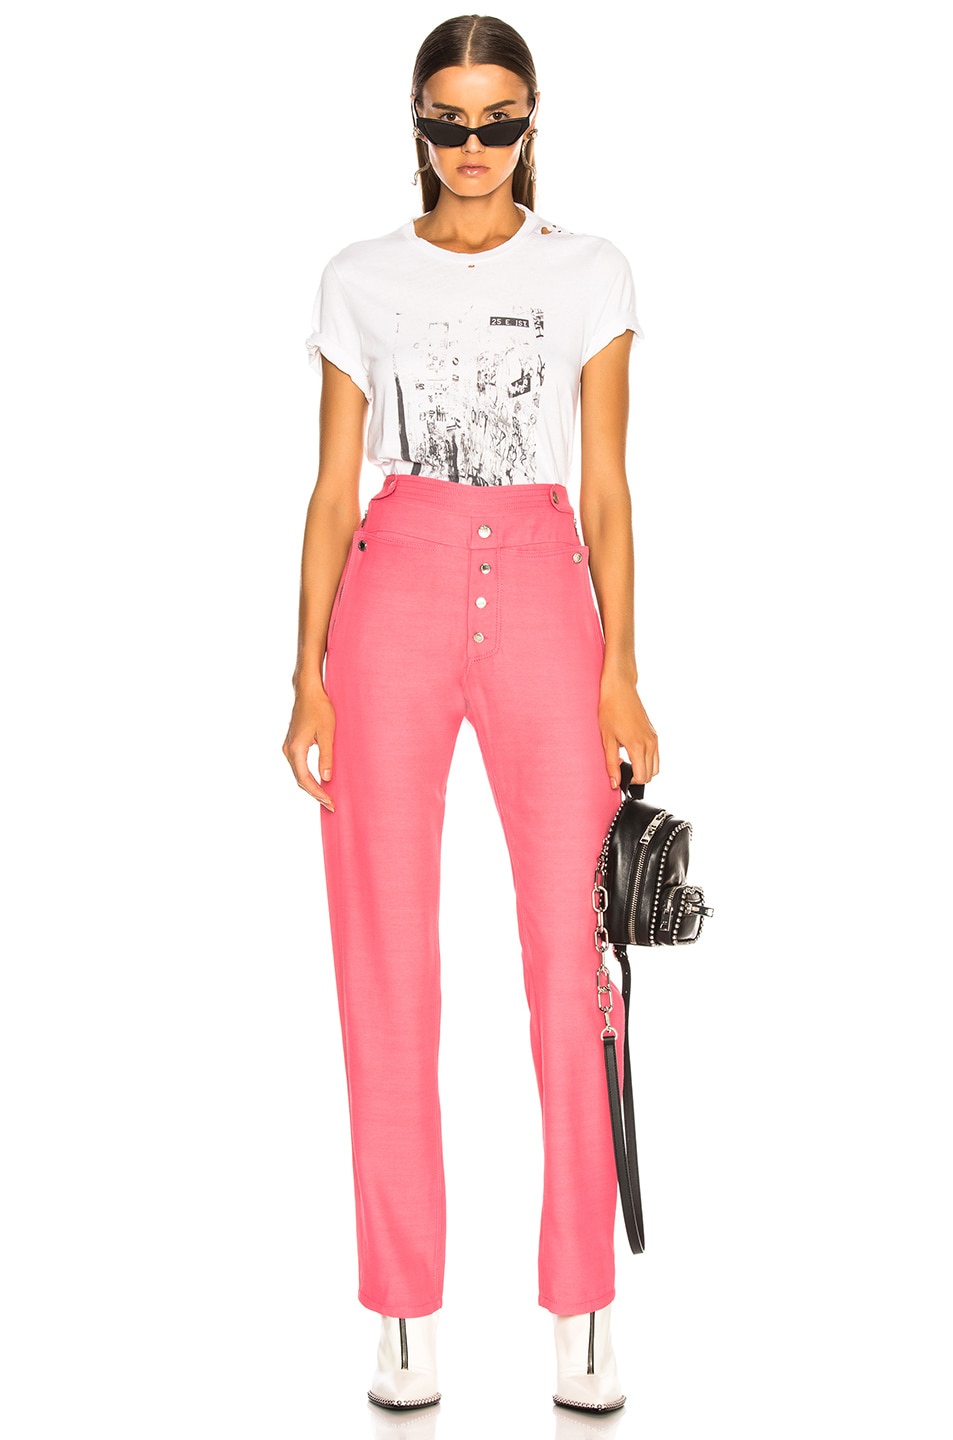 TRE by Natalie Ratabesi Wide Leg Charlotte Pant in Pink Candy | FWRD